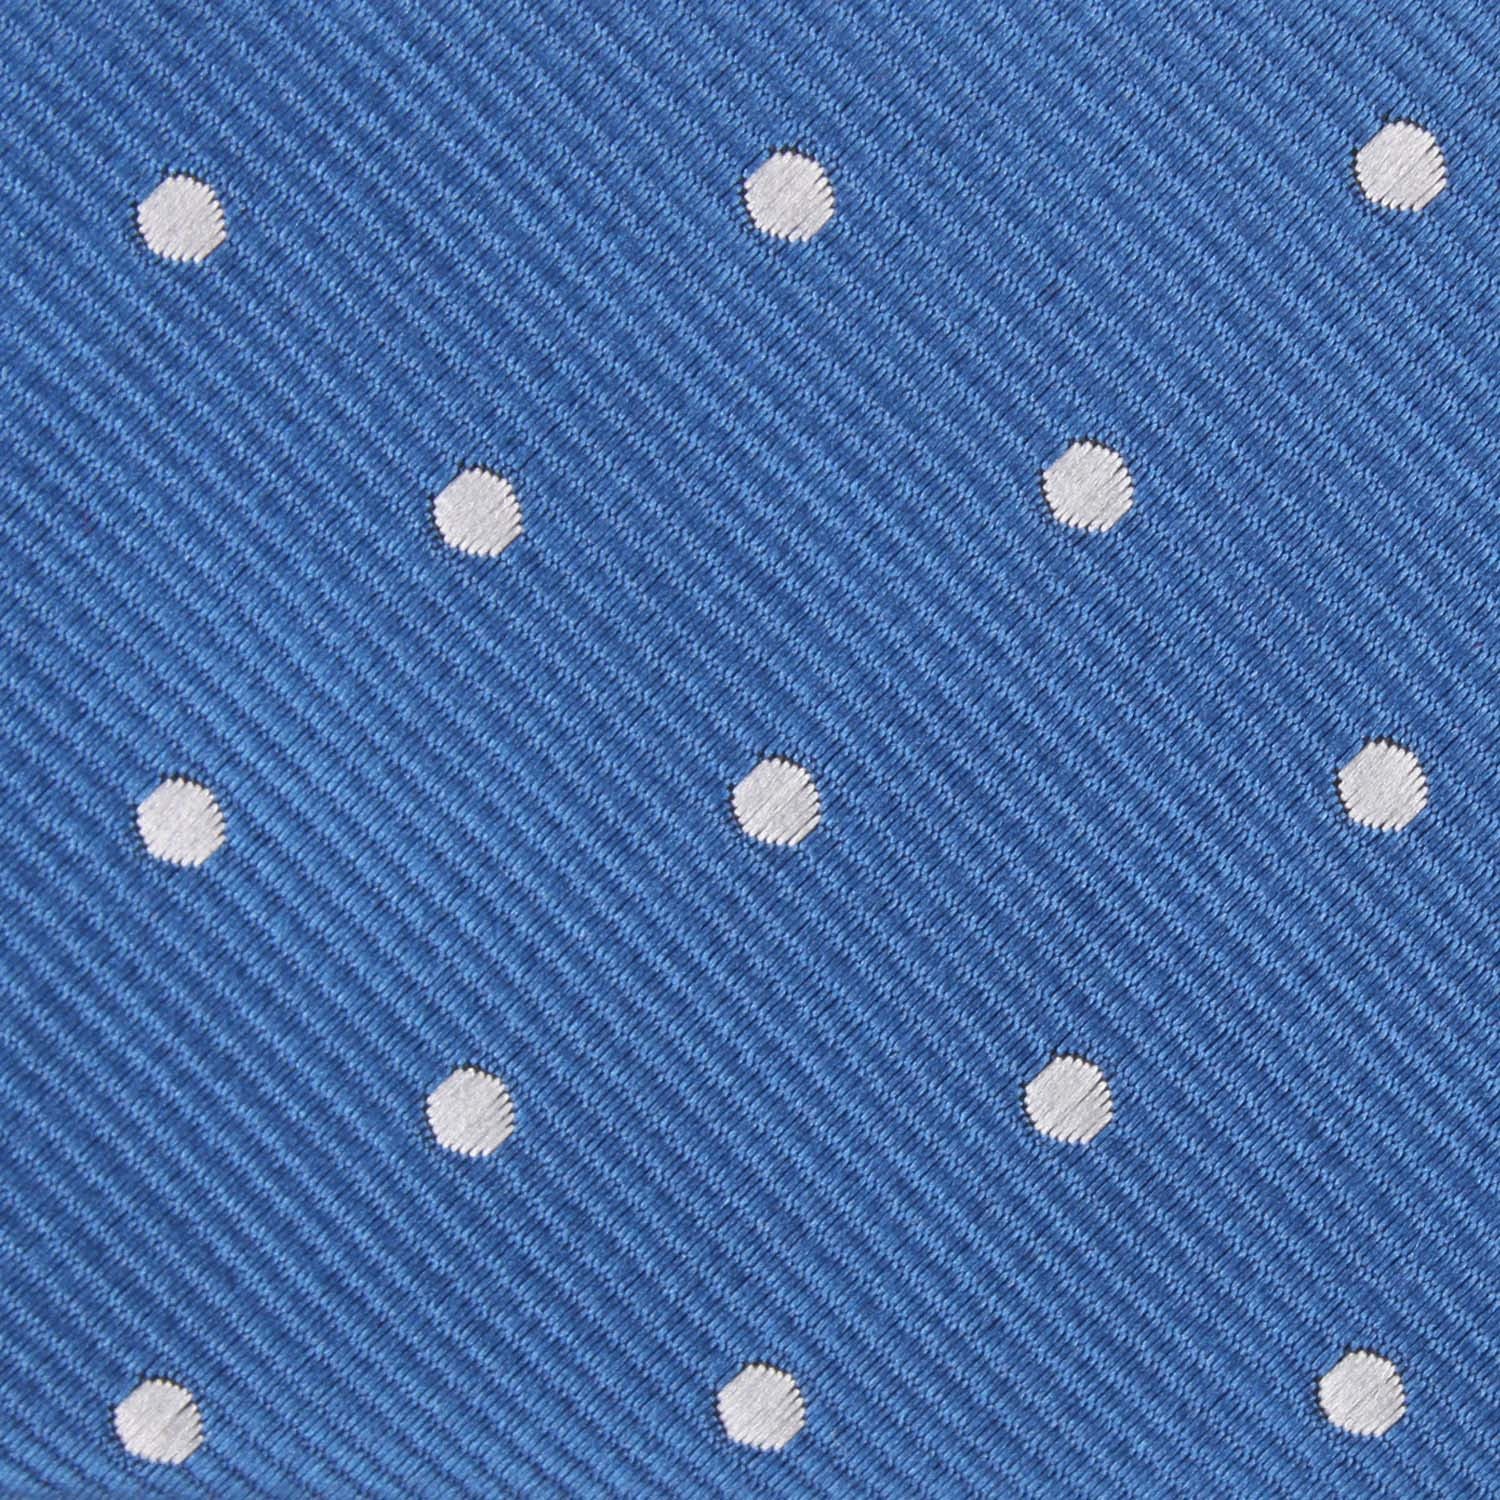 Royal Blue with White Polka Dots Fabric Self Tie Diamond Tip Bow Tie M125